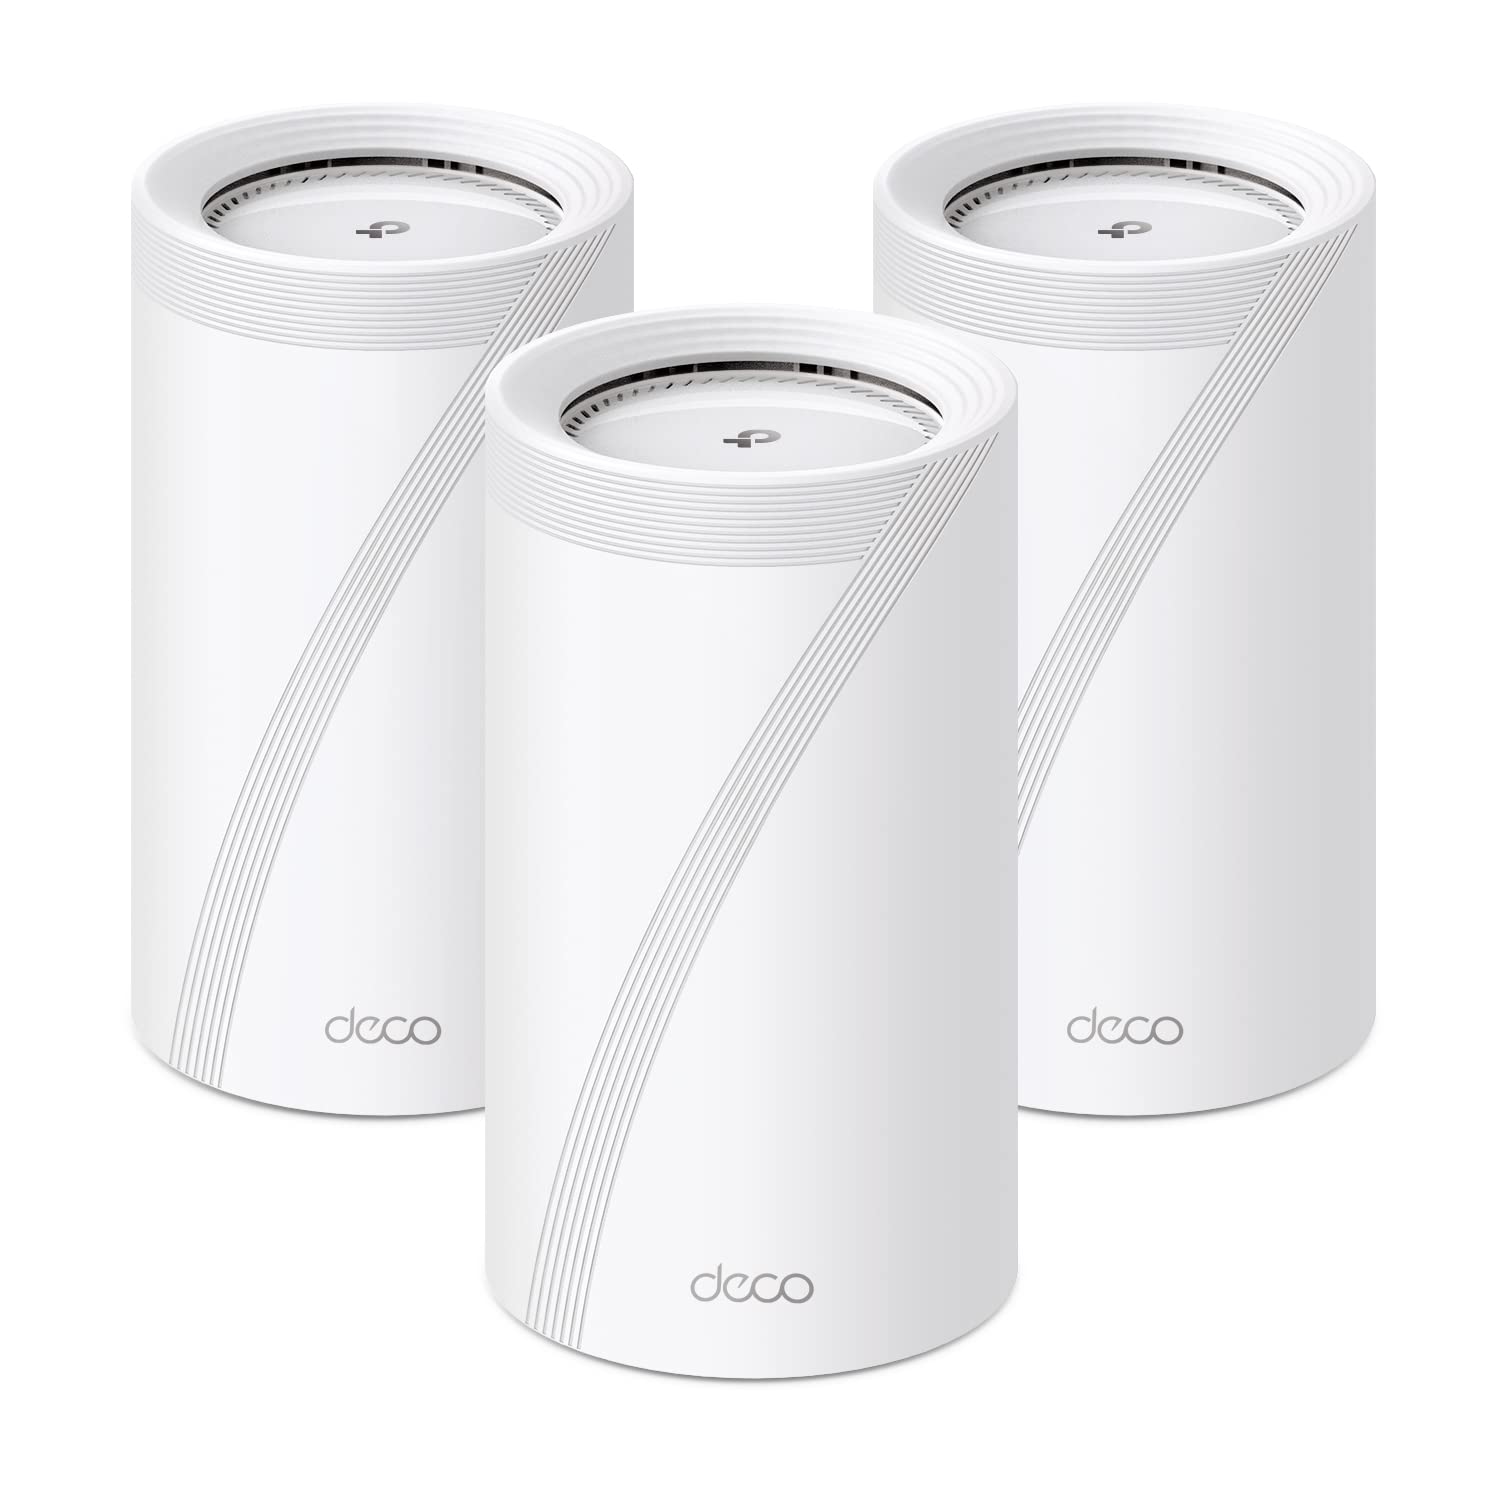 TP-Link Deco E4 Review: Most Affordable Mesh WiFi System